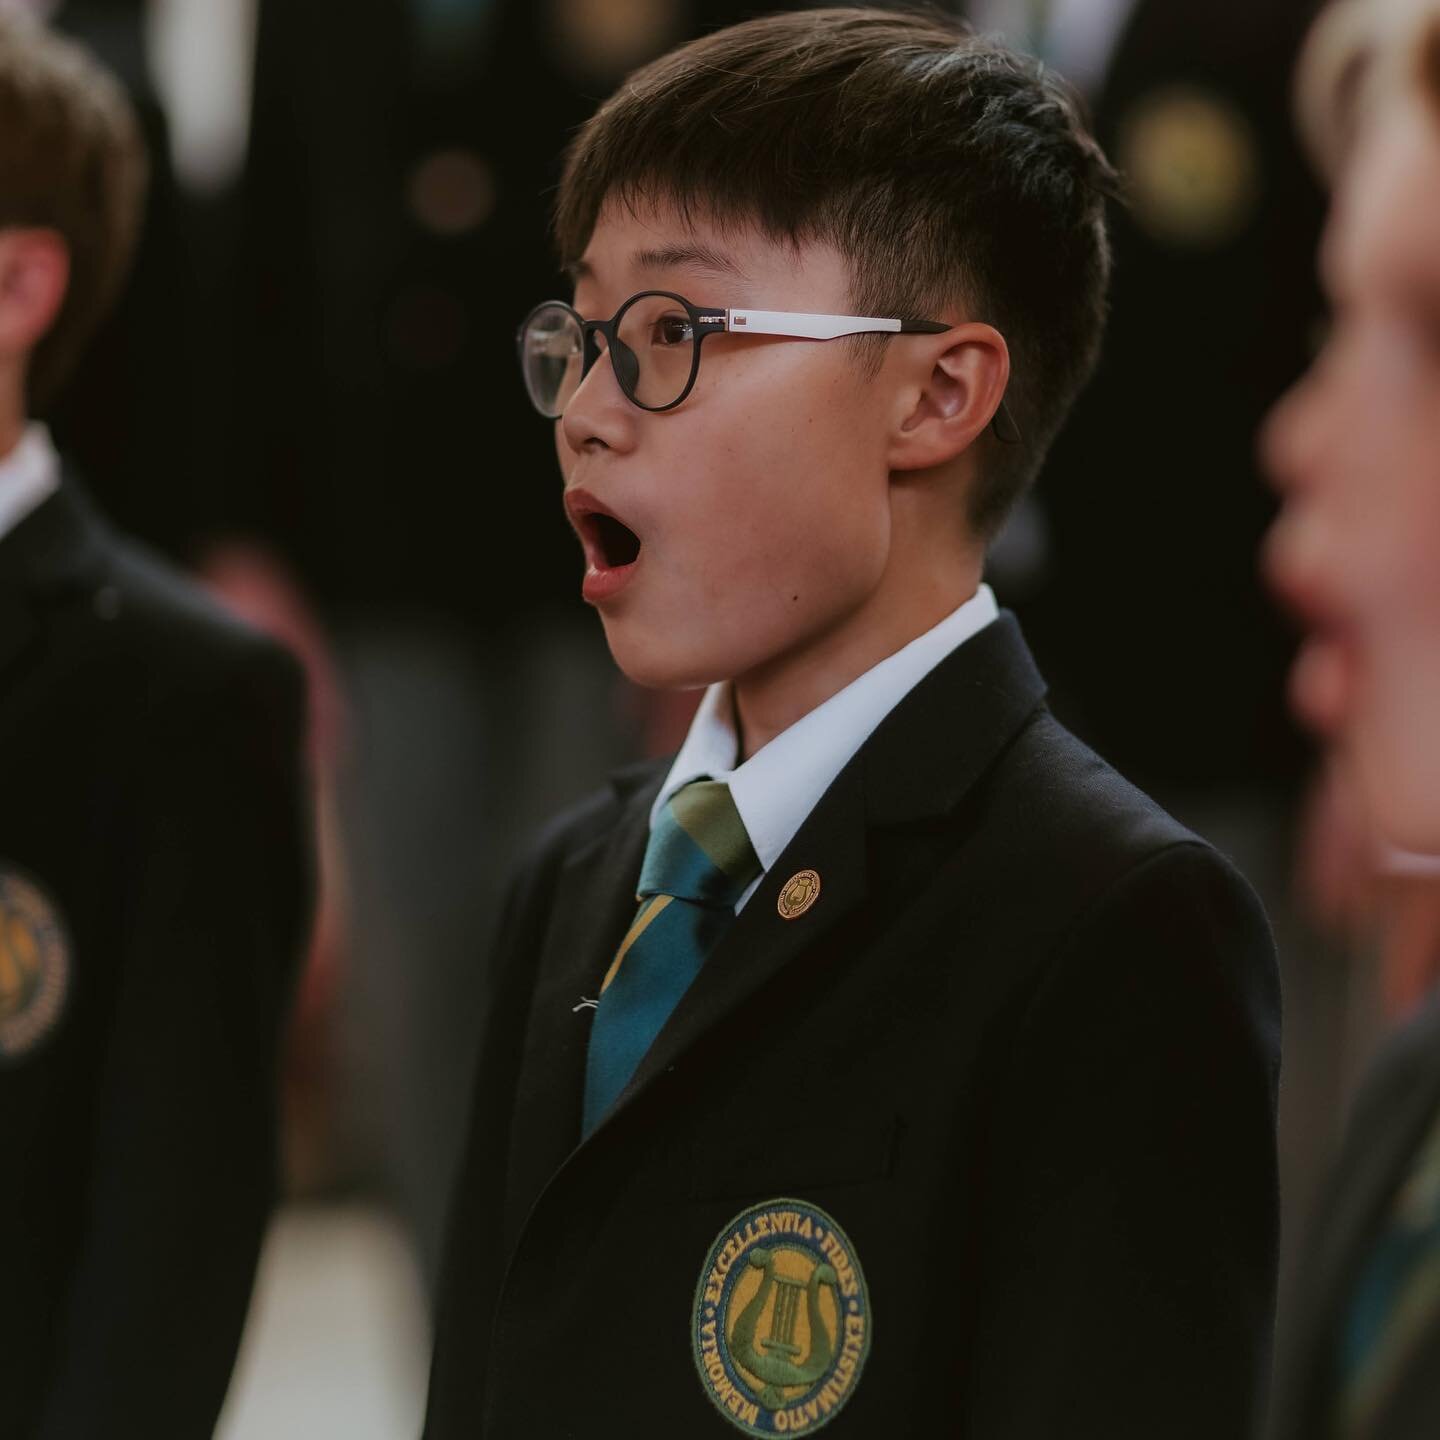 In every young man is an instrument of beauty that is revealed through hard work, and the urge to uncover the music within him.

#BoyChoir #BoysChoir #Singing #ClassicalMusic #YoungMan #Symphony #Orchestra #Choir #Chorale #ChamberChoir #ChoralMusic #